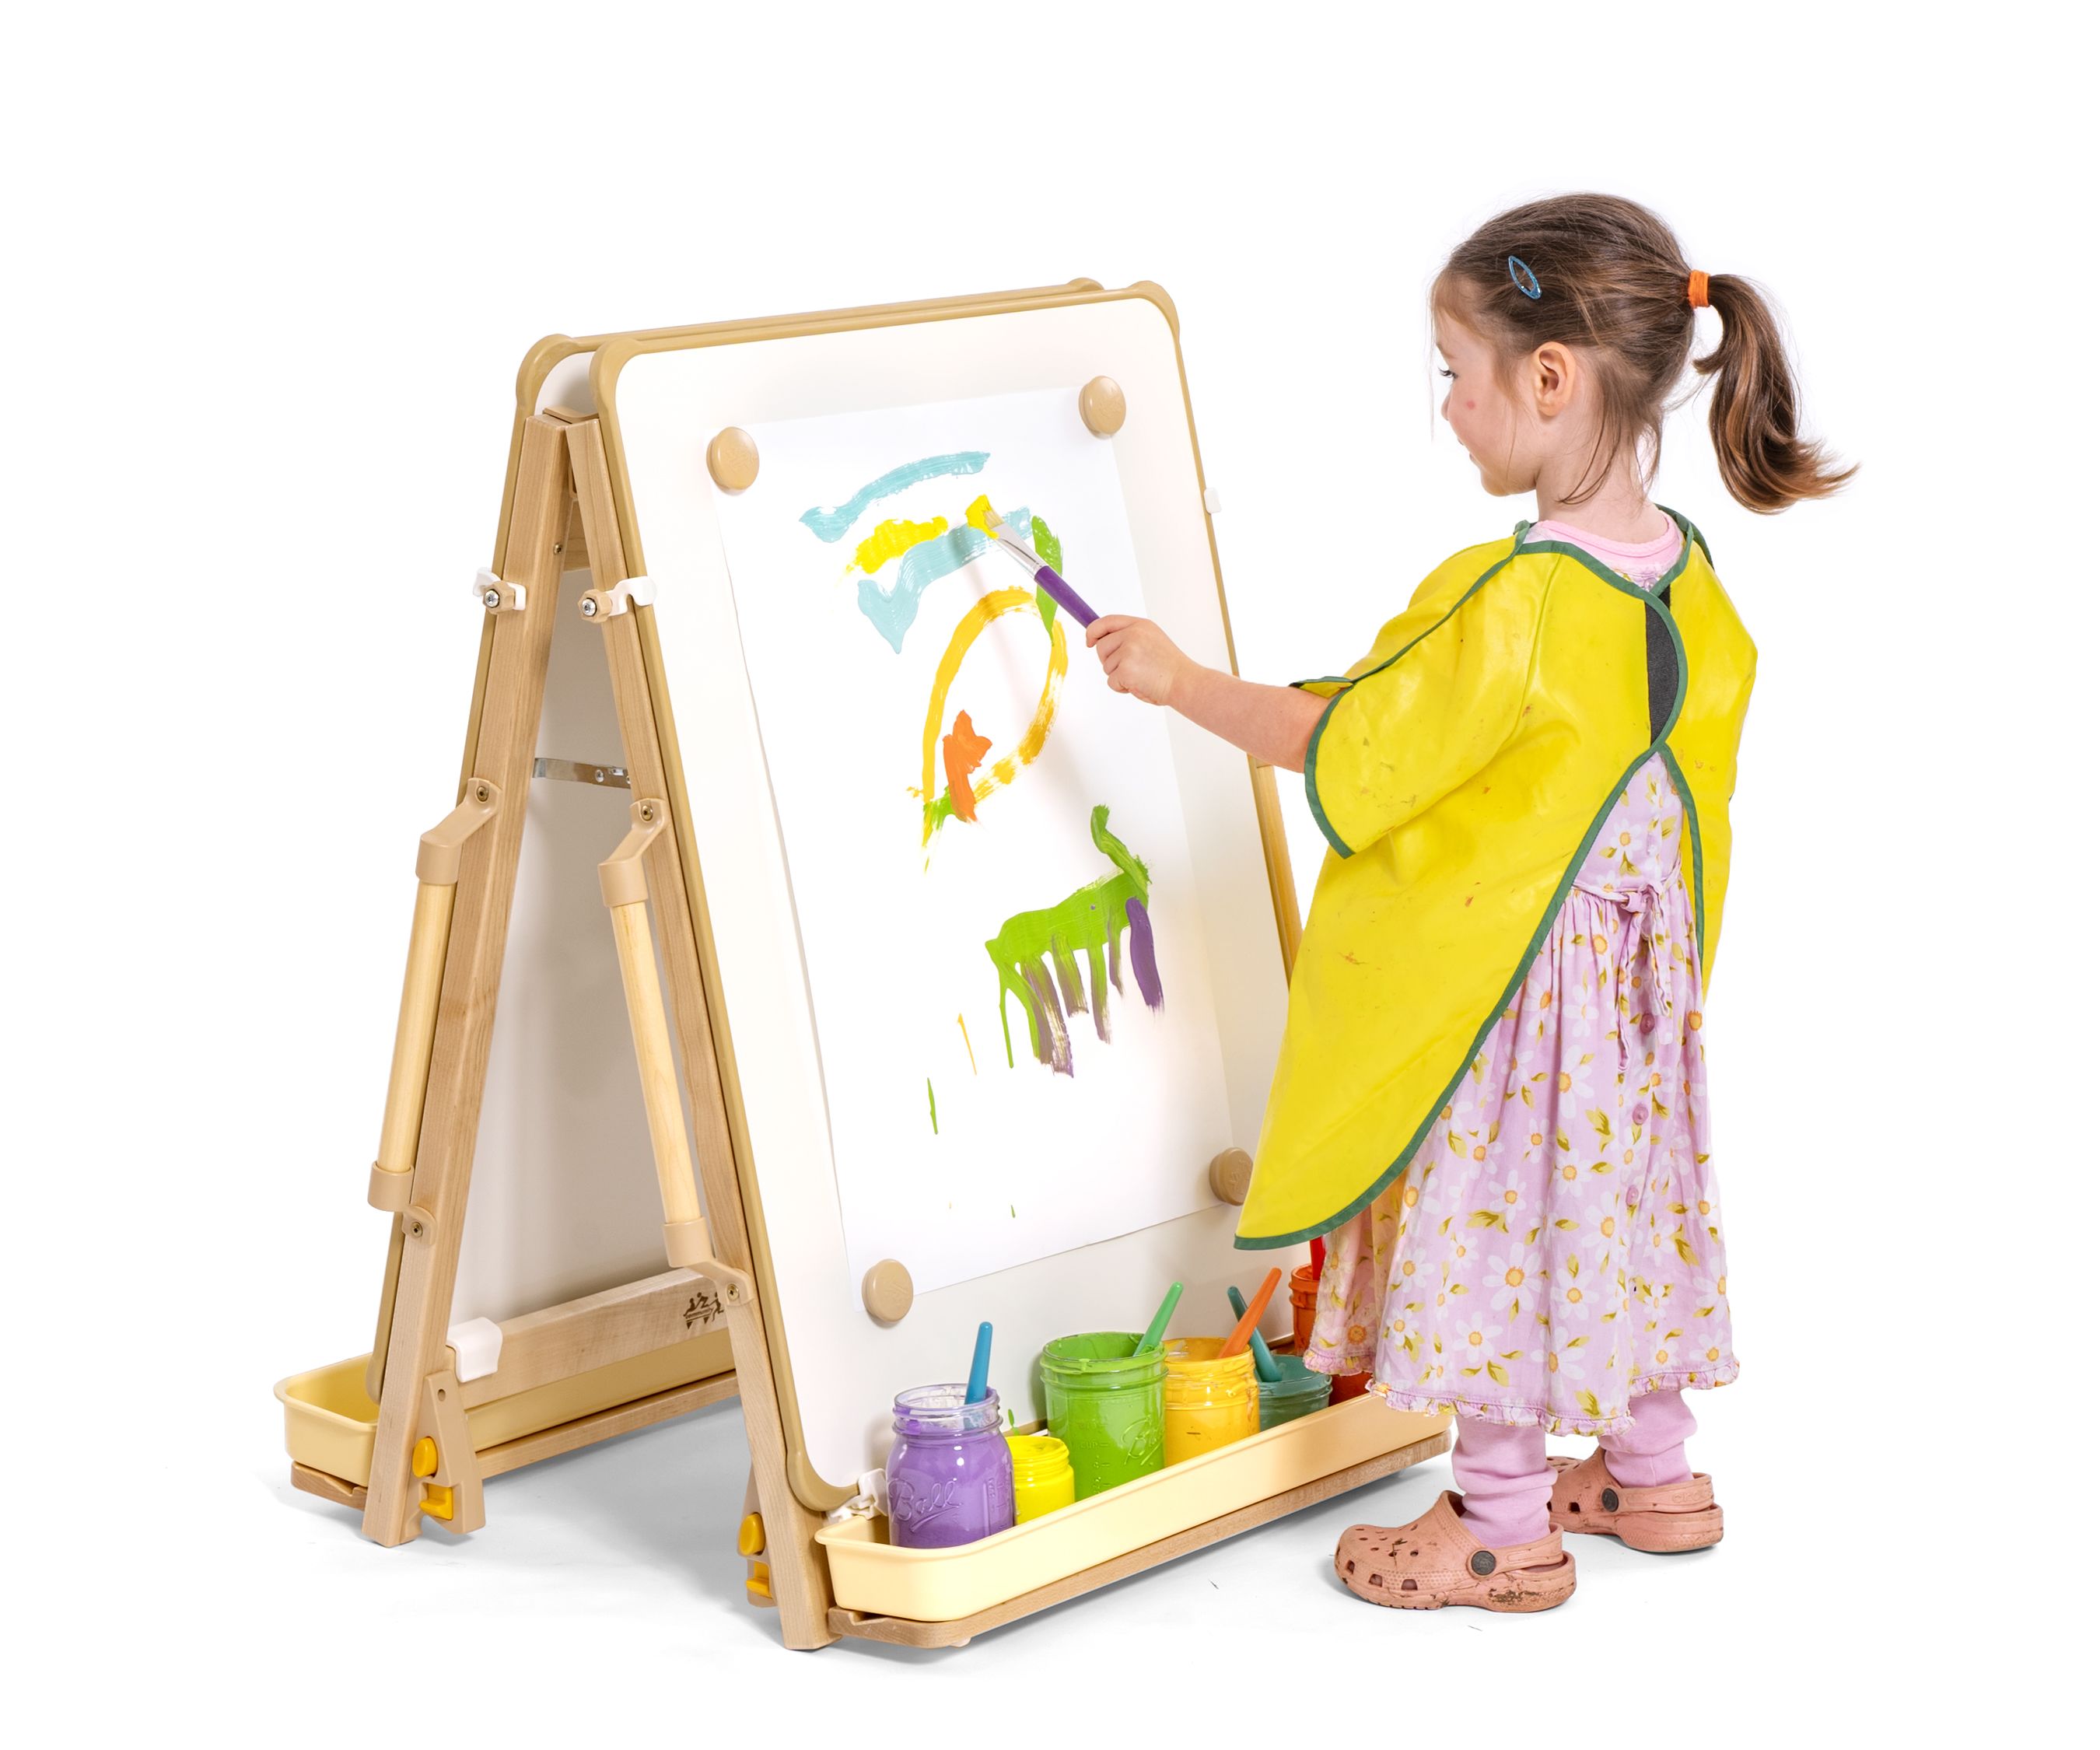 https://www.communityplaythings.com/-/media/images/product-images/art-and-science/art/product-images/h505-mini-floor-easel/h505-in-use-1.ashx?rev=35df5c05b98446c6acc254aa5b42a46b&hash=9C10C17482339C2240B00E701FFAA594